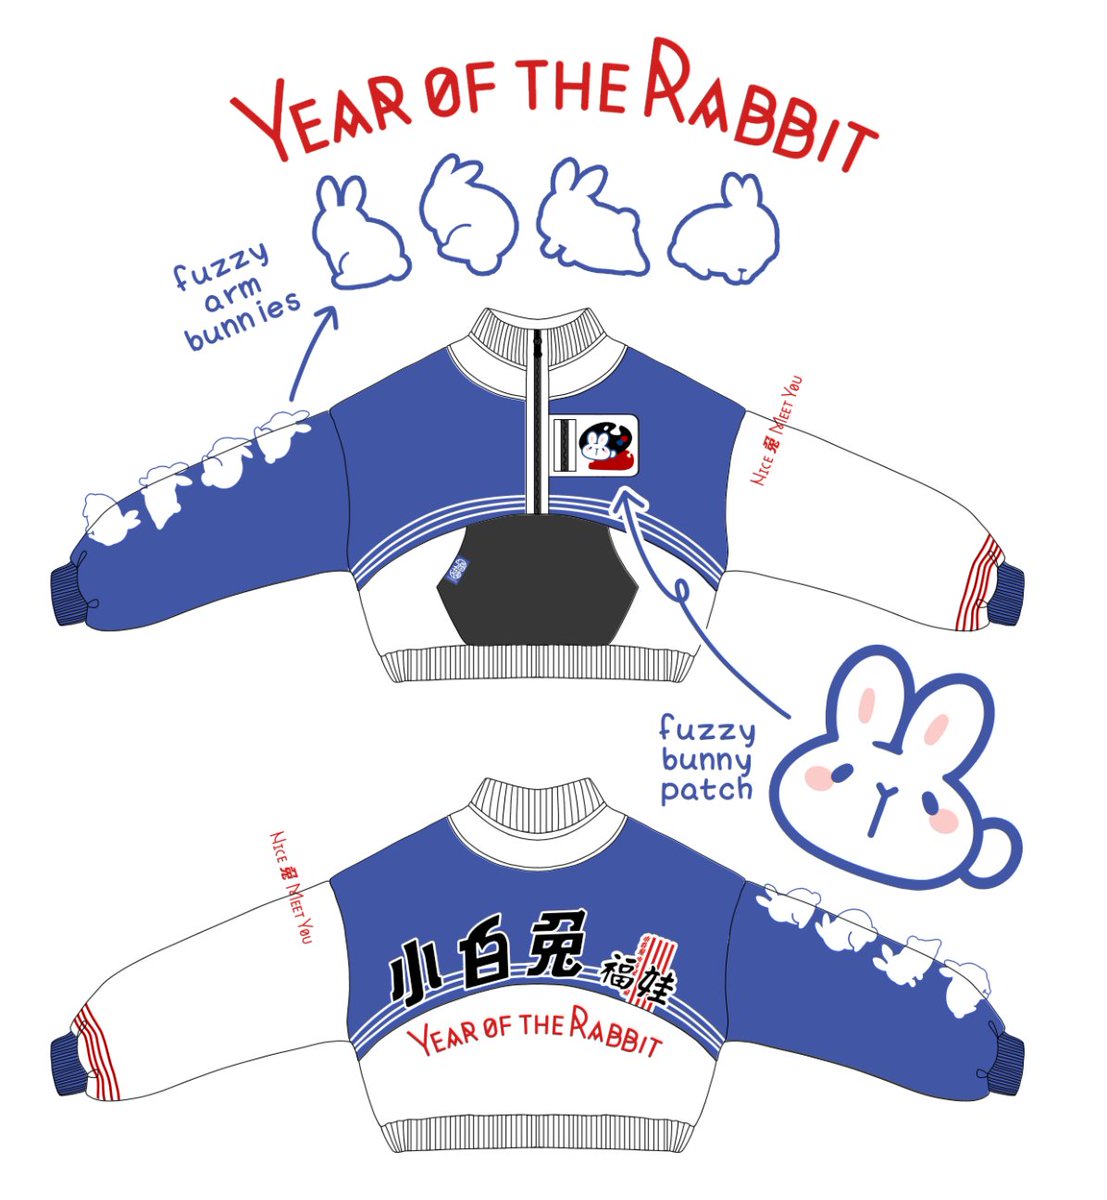 Year of the Rabbit jackets coming soon!🐰🧧

ETA: Dec 2022 - Jan 2023
Sign up for email updates!
https://t.co/3Q5bA60MhC 